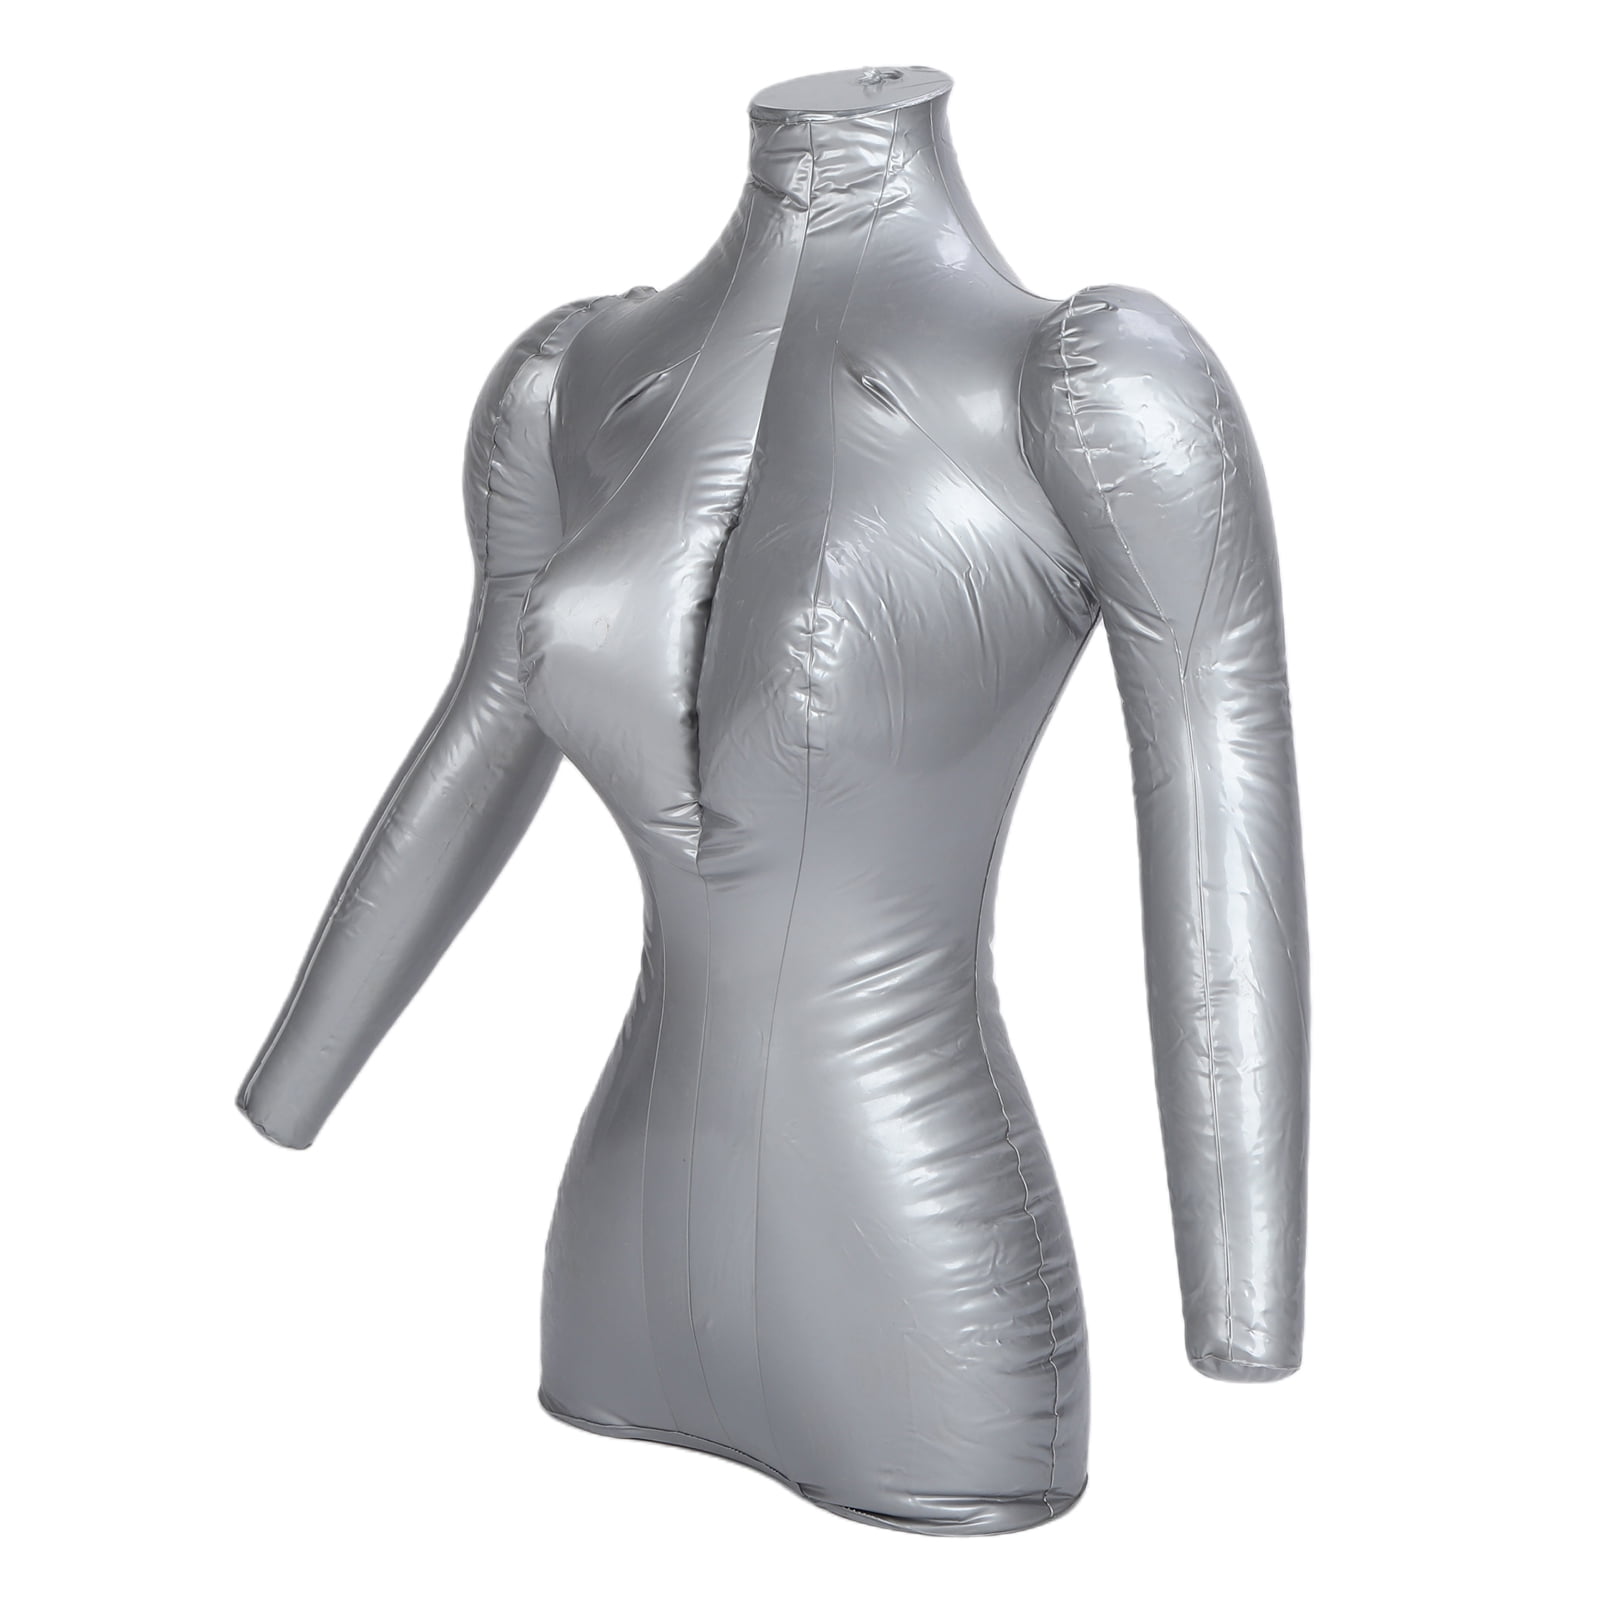 GPVC Inflatable Mannequin Body Female Model Window SHOP DISPLAY 